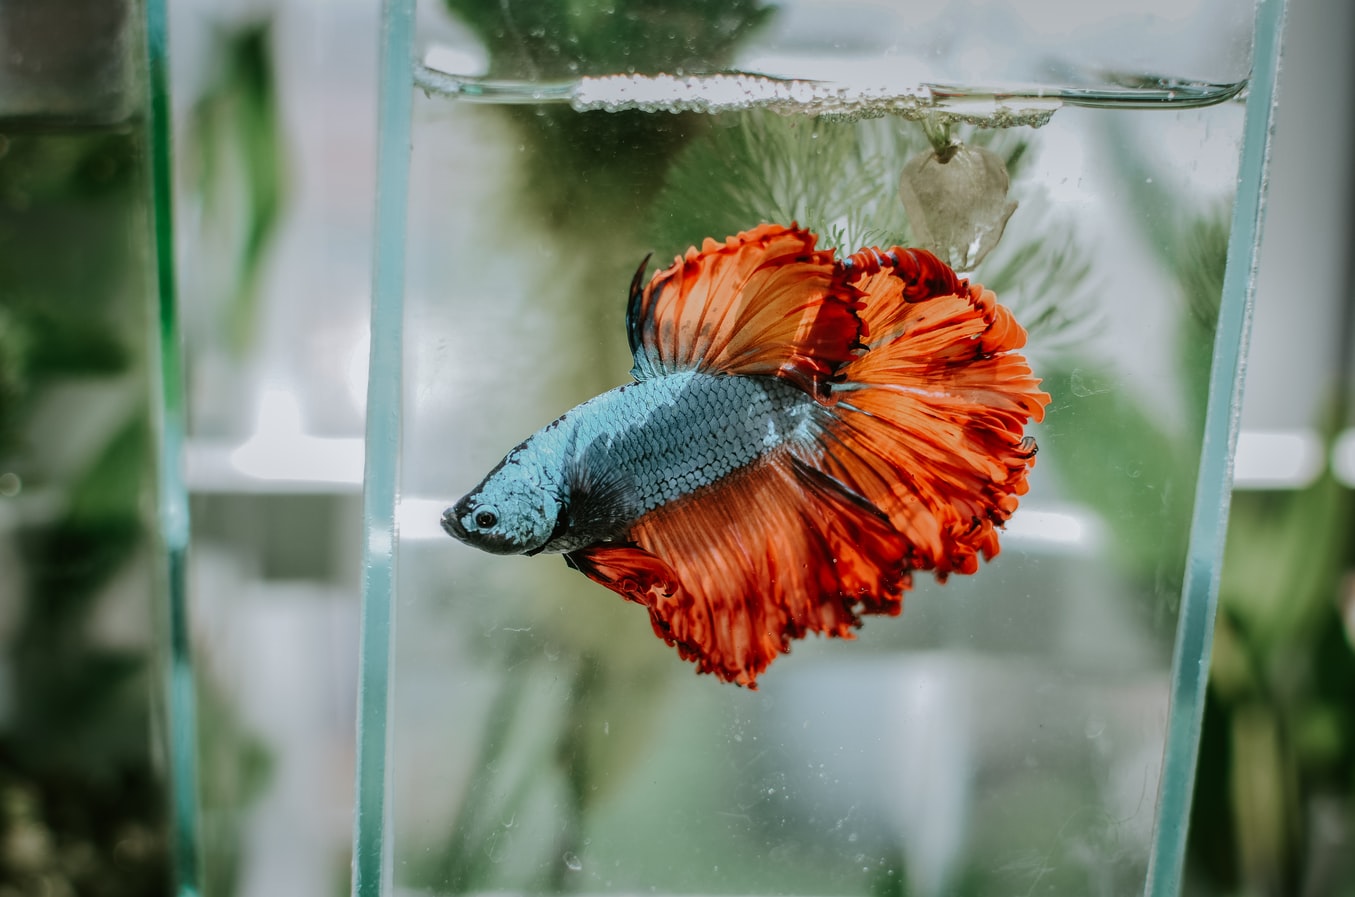 How to Care for a Betta Fish in a Vase